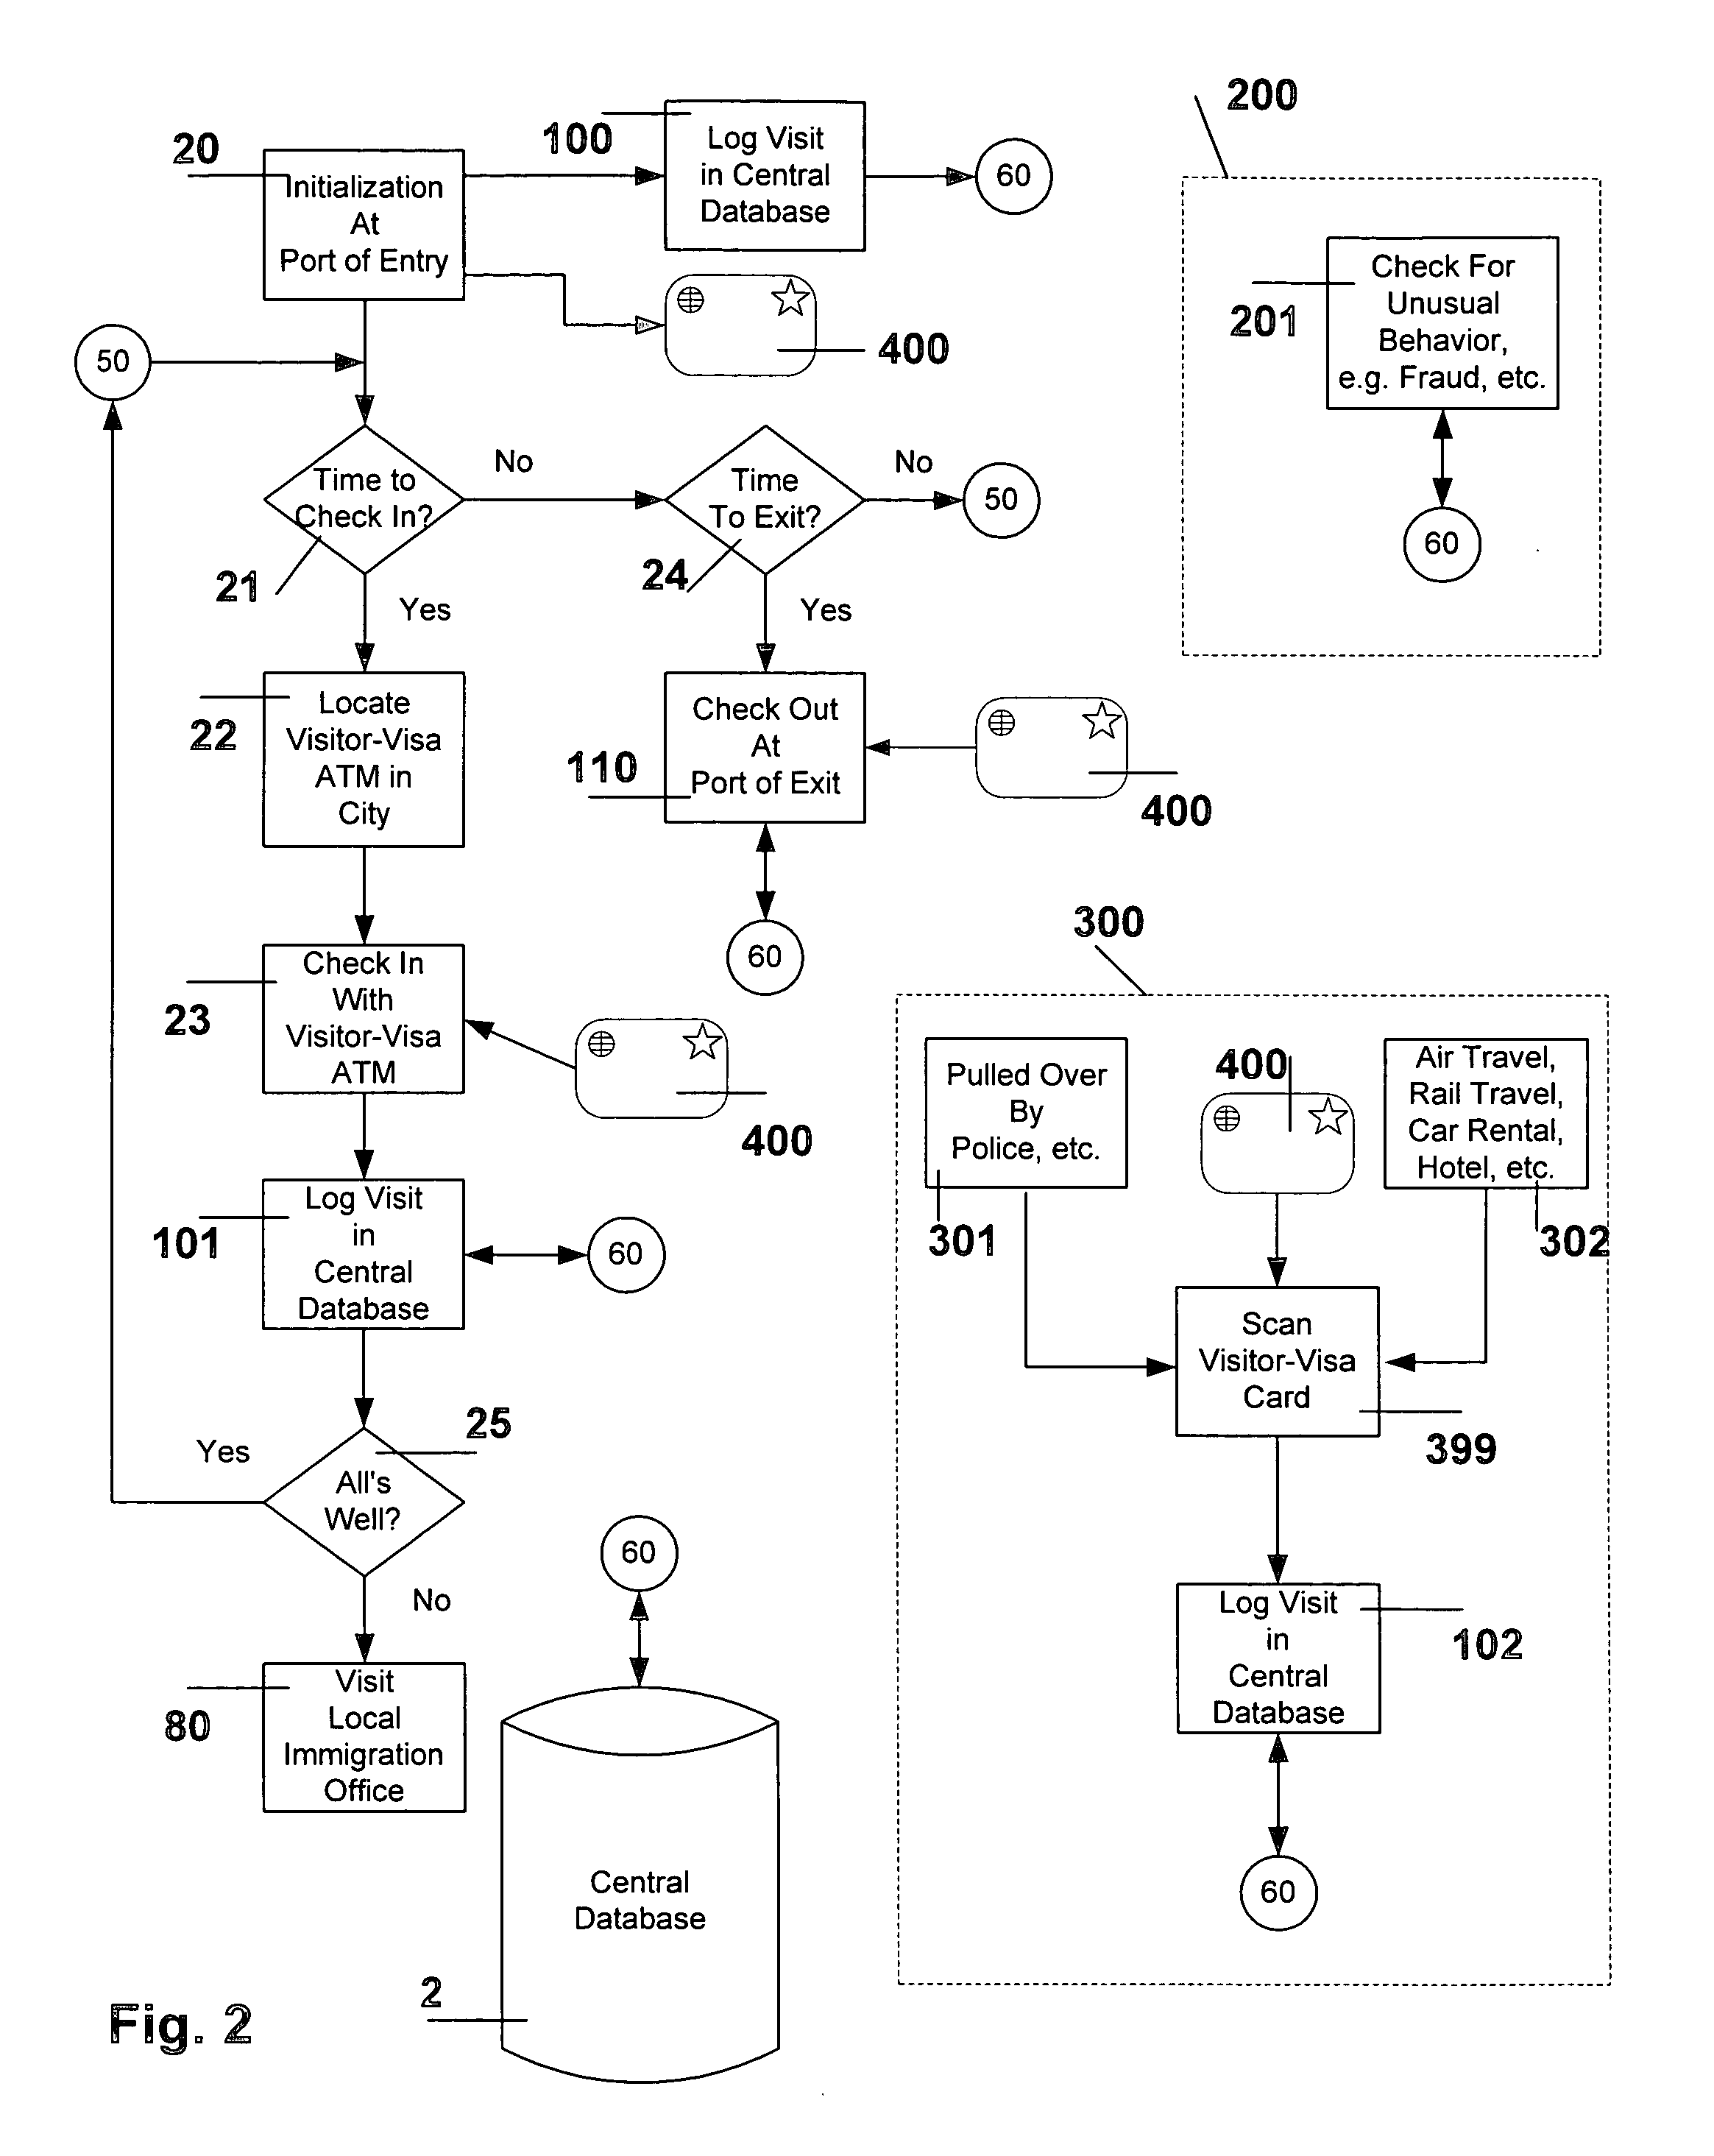 Method and system to validate periodically the visa of a foreign visitor during the visitor's in-country stay